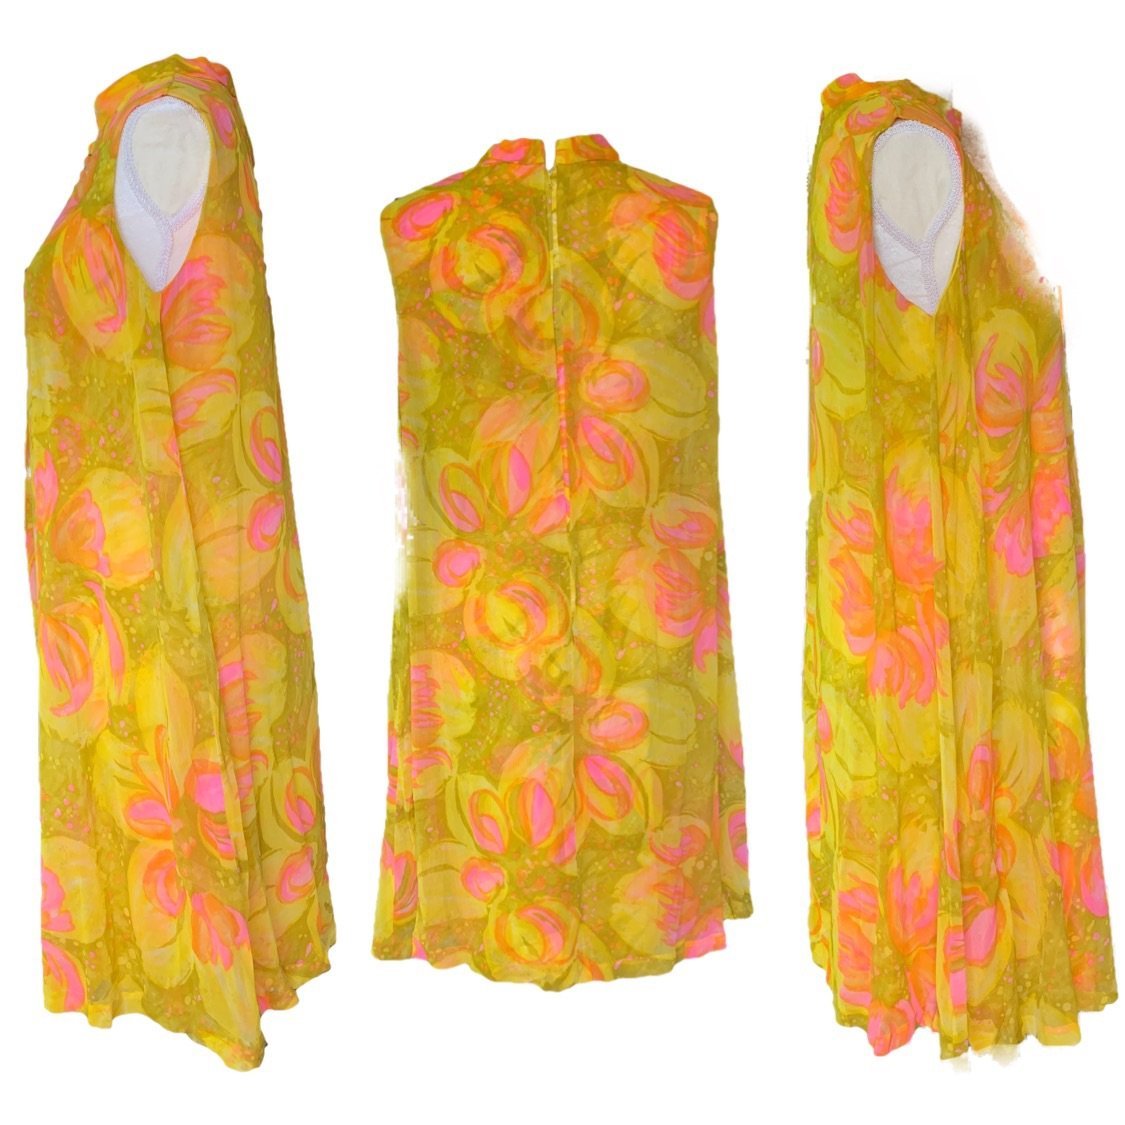 Vintage 1960s Chiffon GoGo Dress by Glenbrooke in a Yellow, Orange and